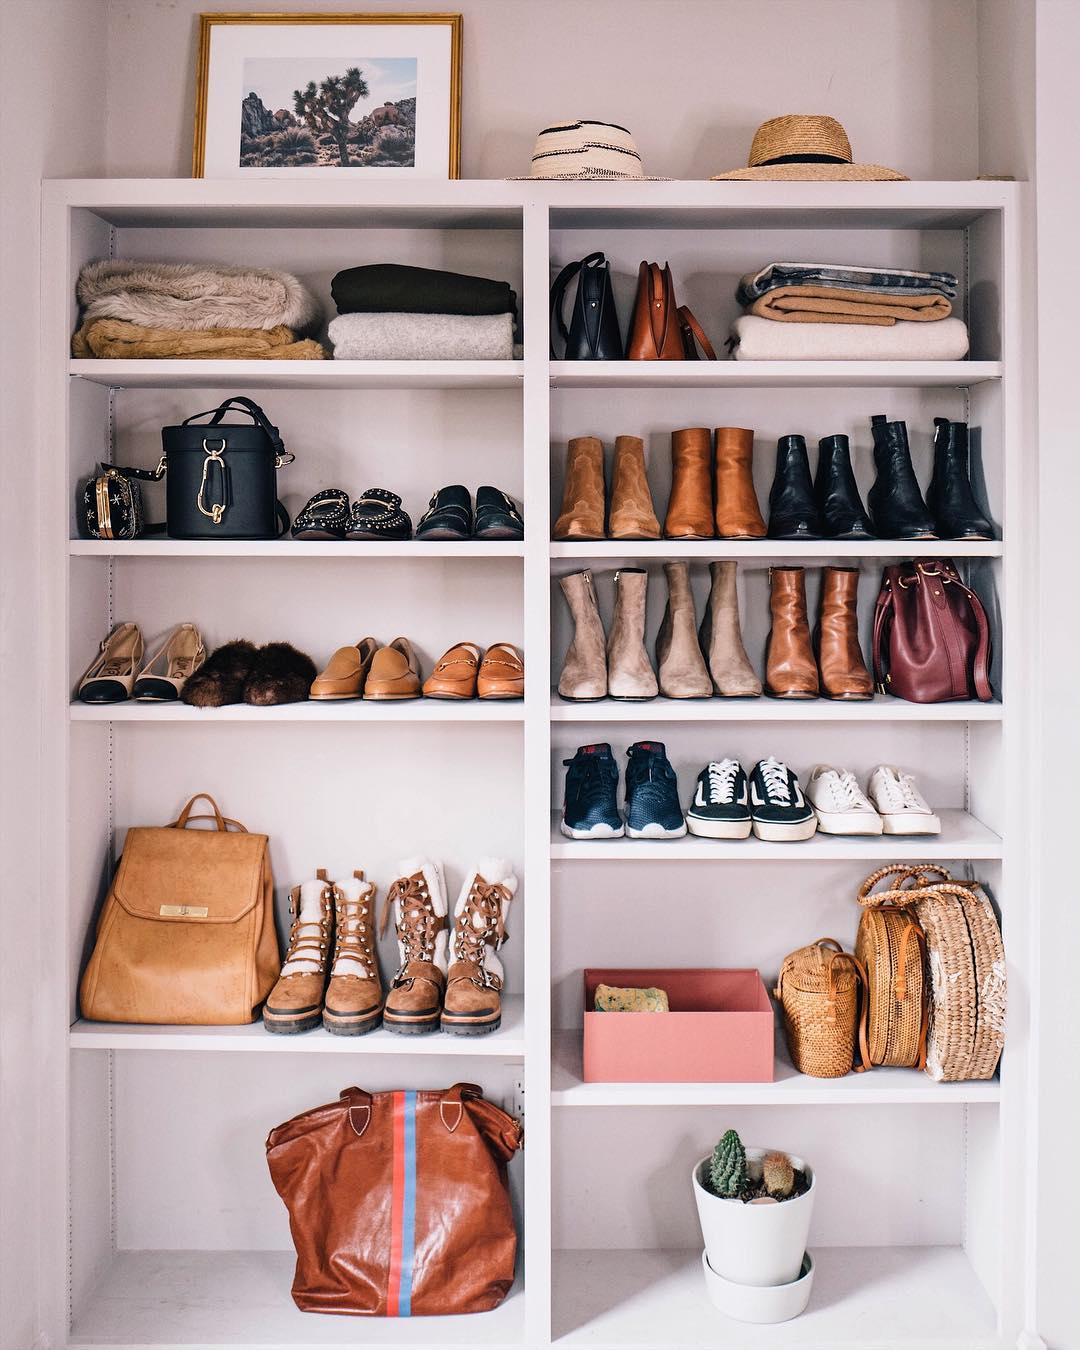 Boots and clothes sitting on white shelves. Photo by Instagram user @jessannkirby